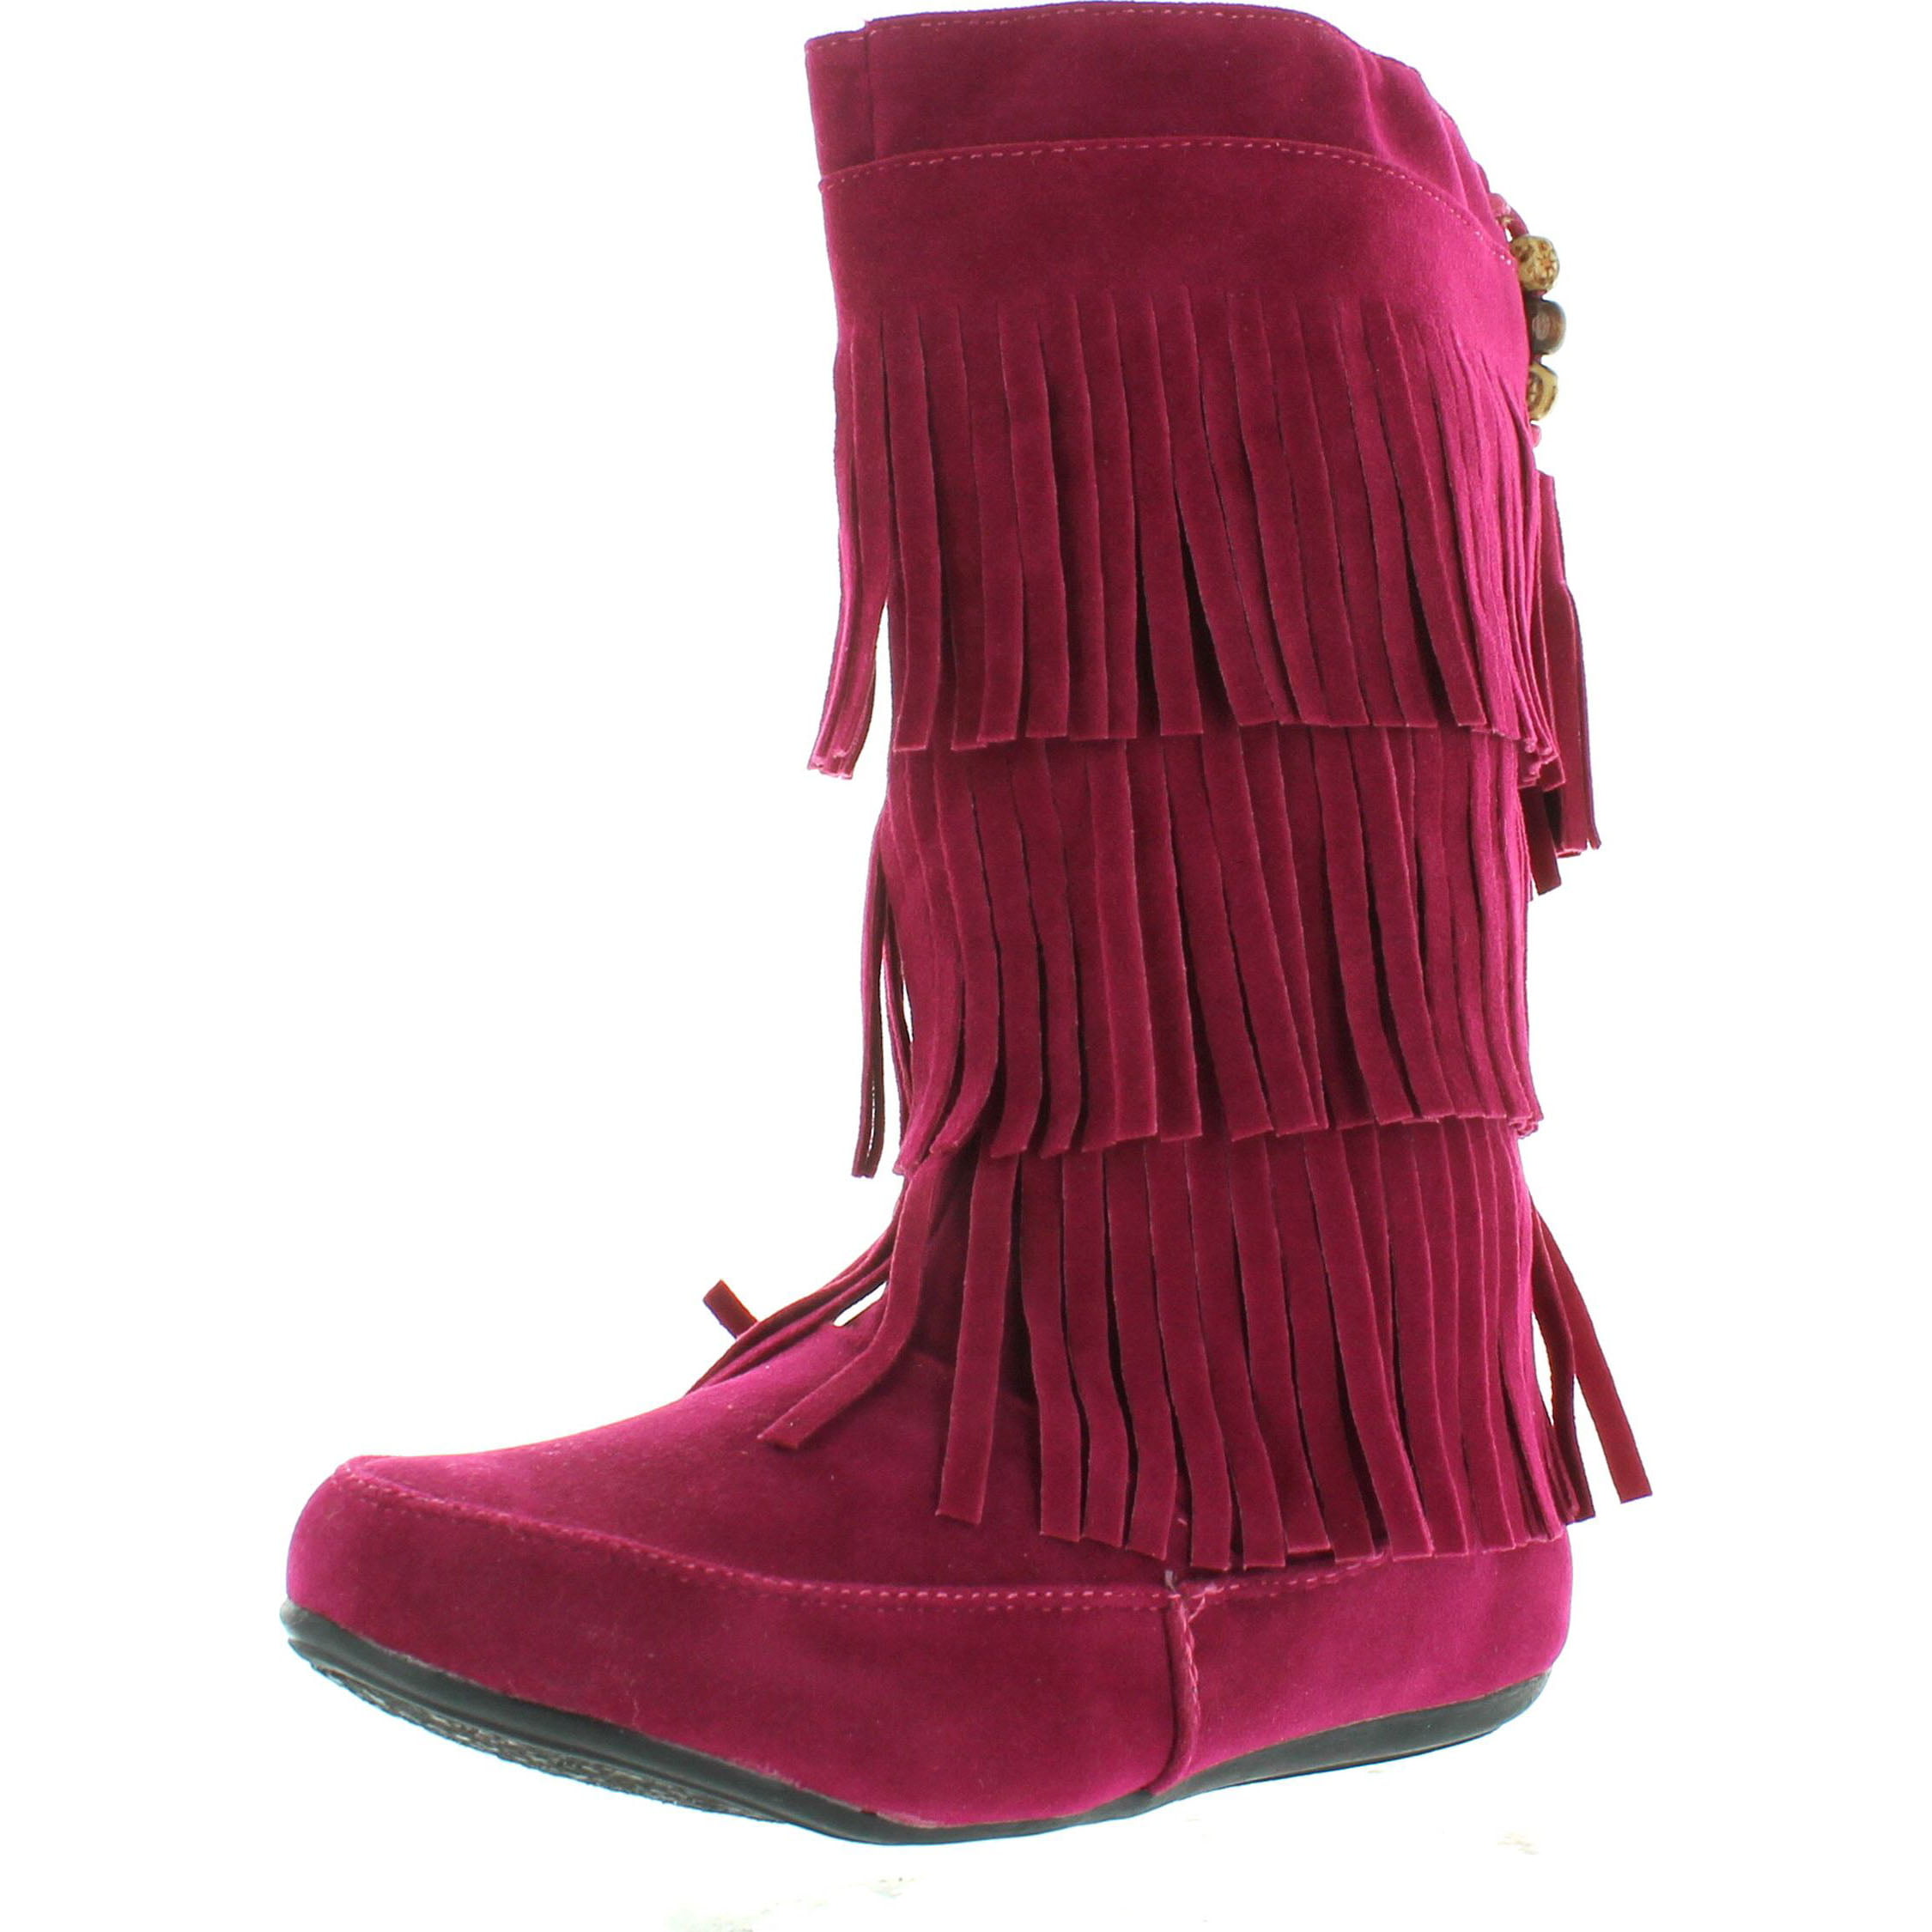 New Girls Faux Suede Fringed Moccasin Tall Boot 18066 By Jelly Beans Collection 